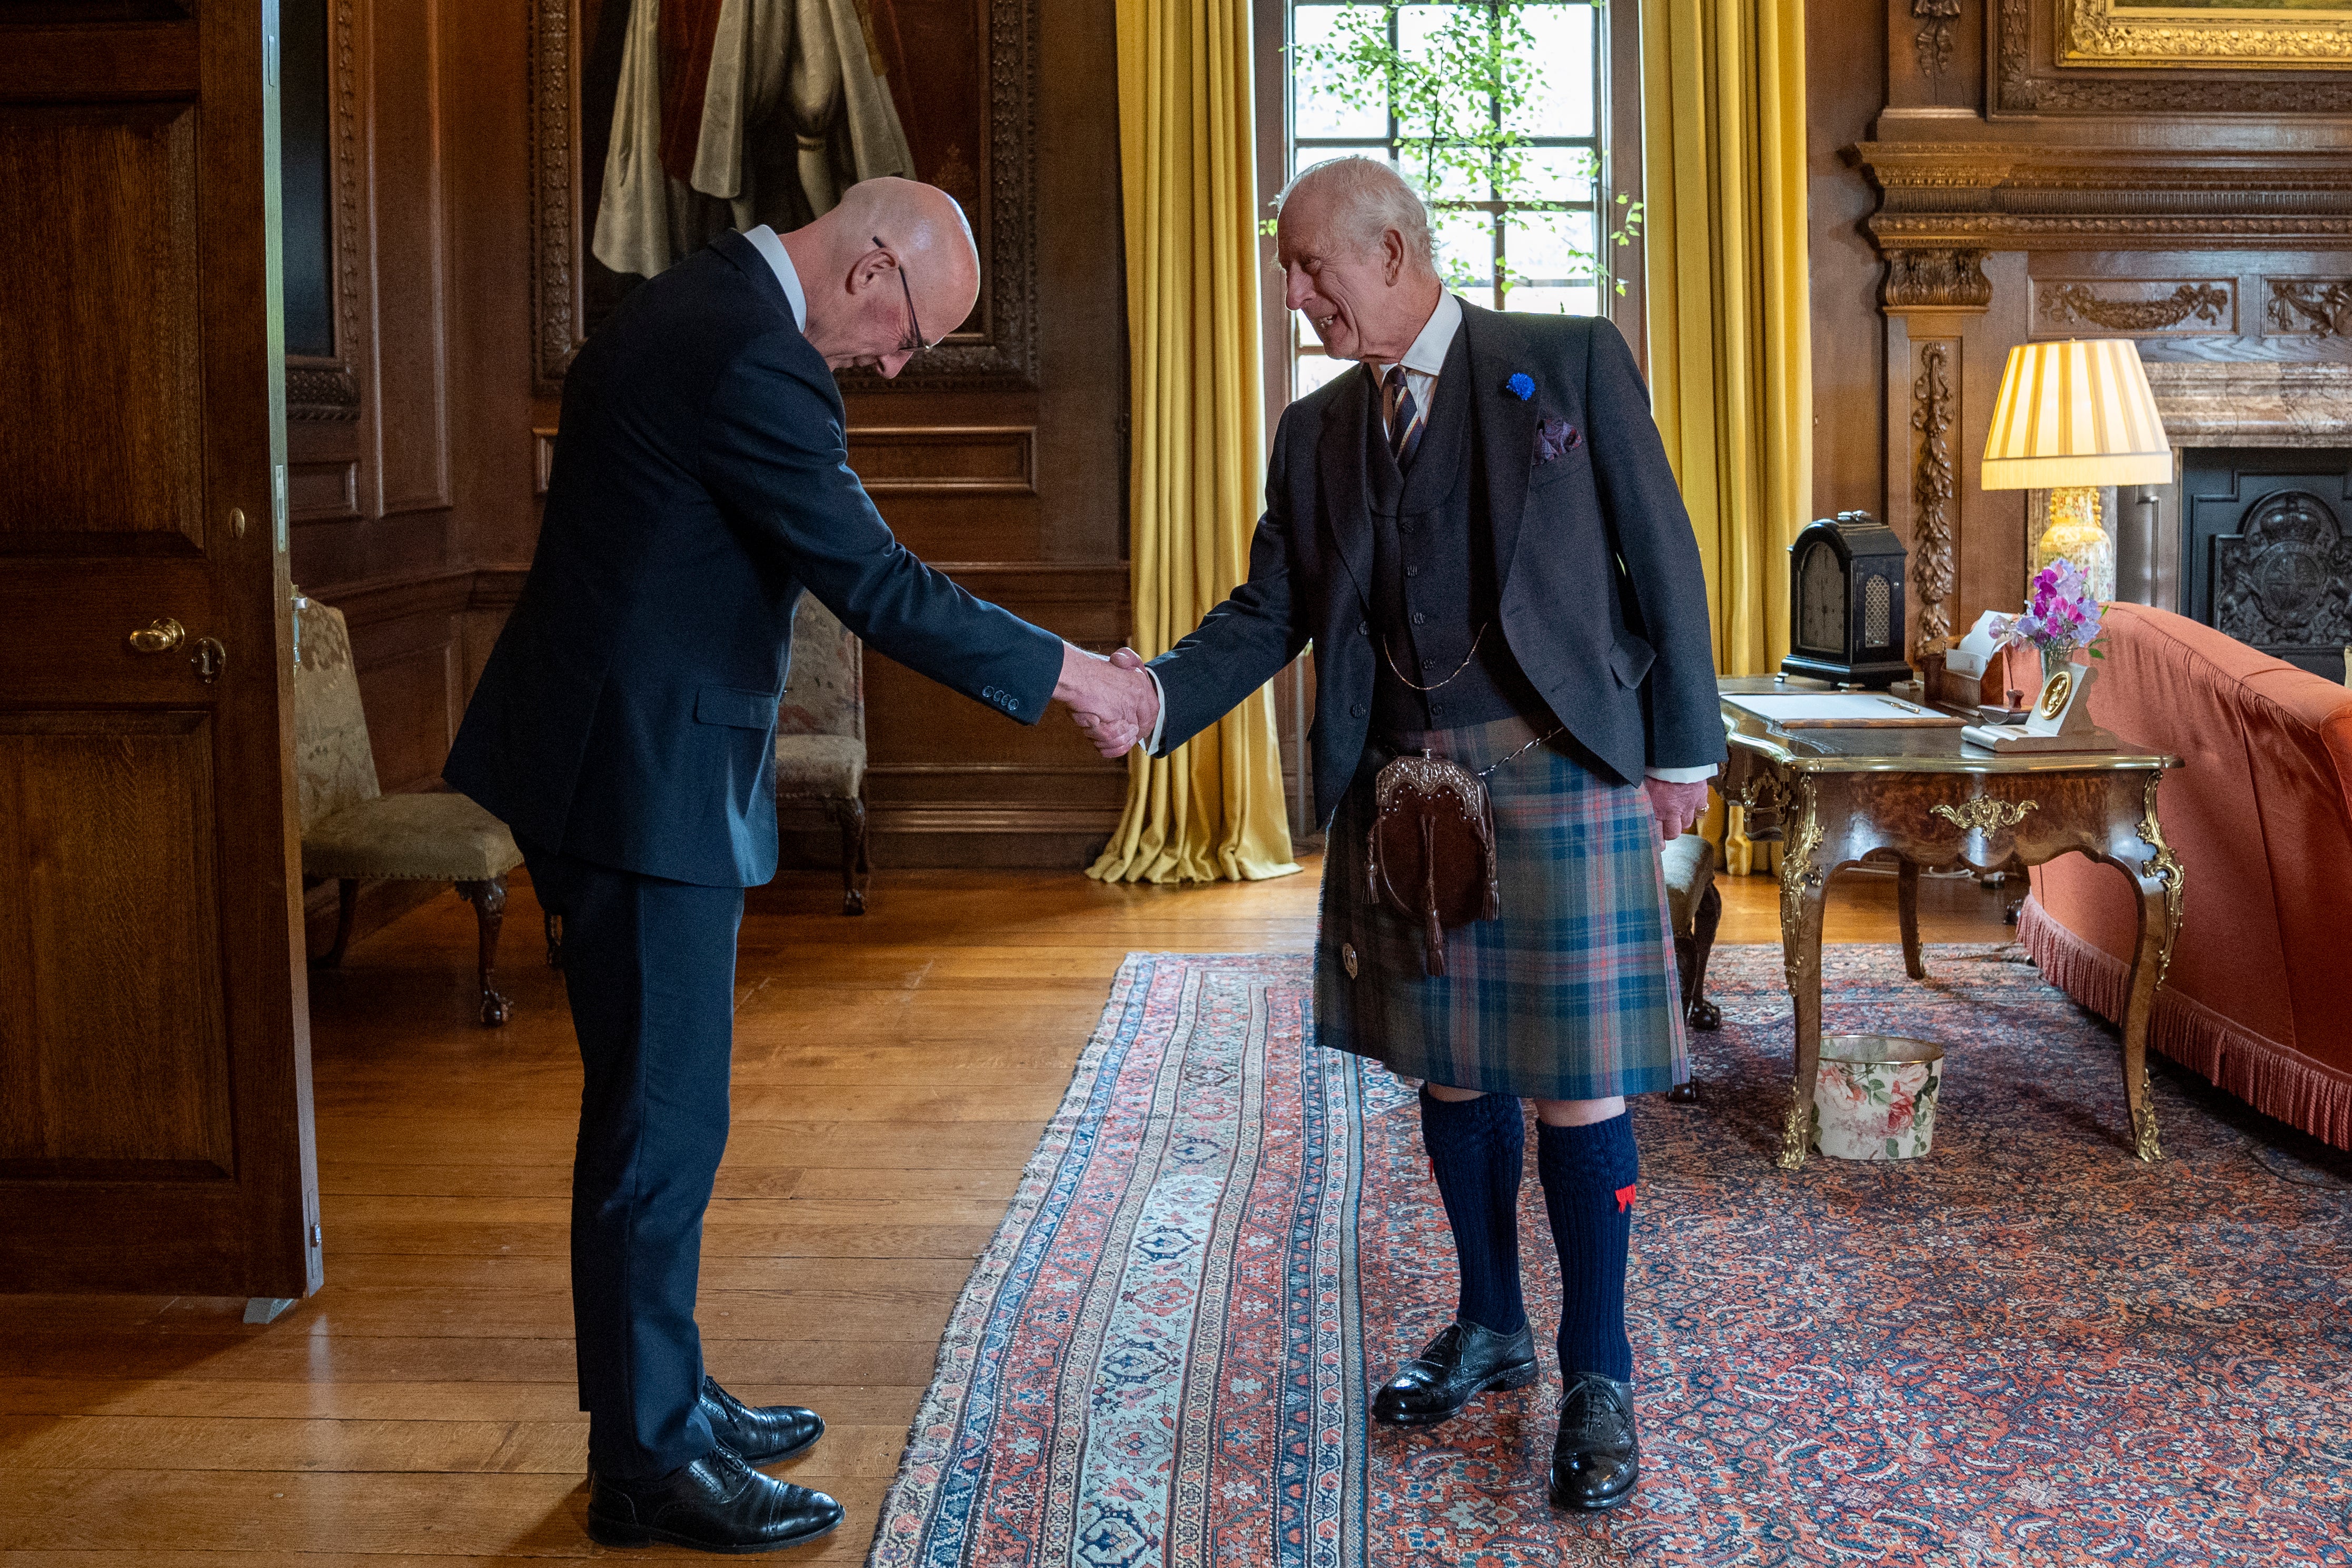 The SNP leader was pictured bowing to the Monarch.